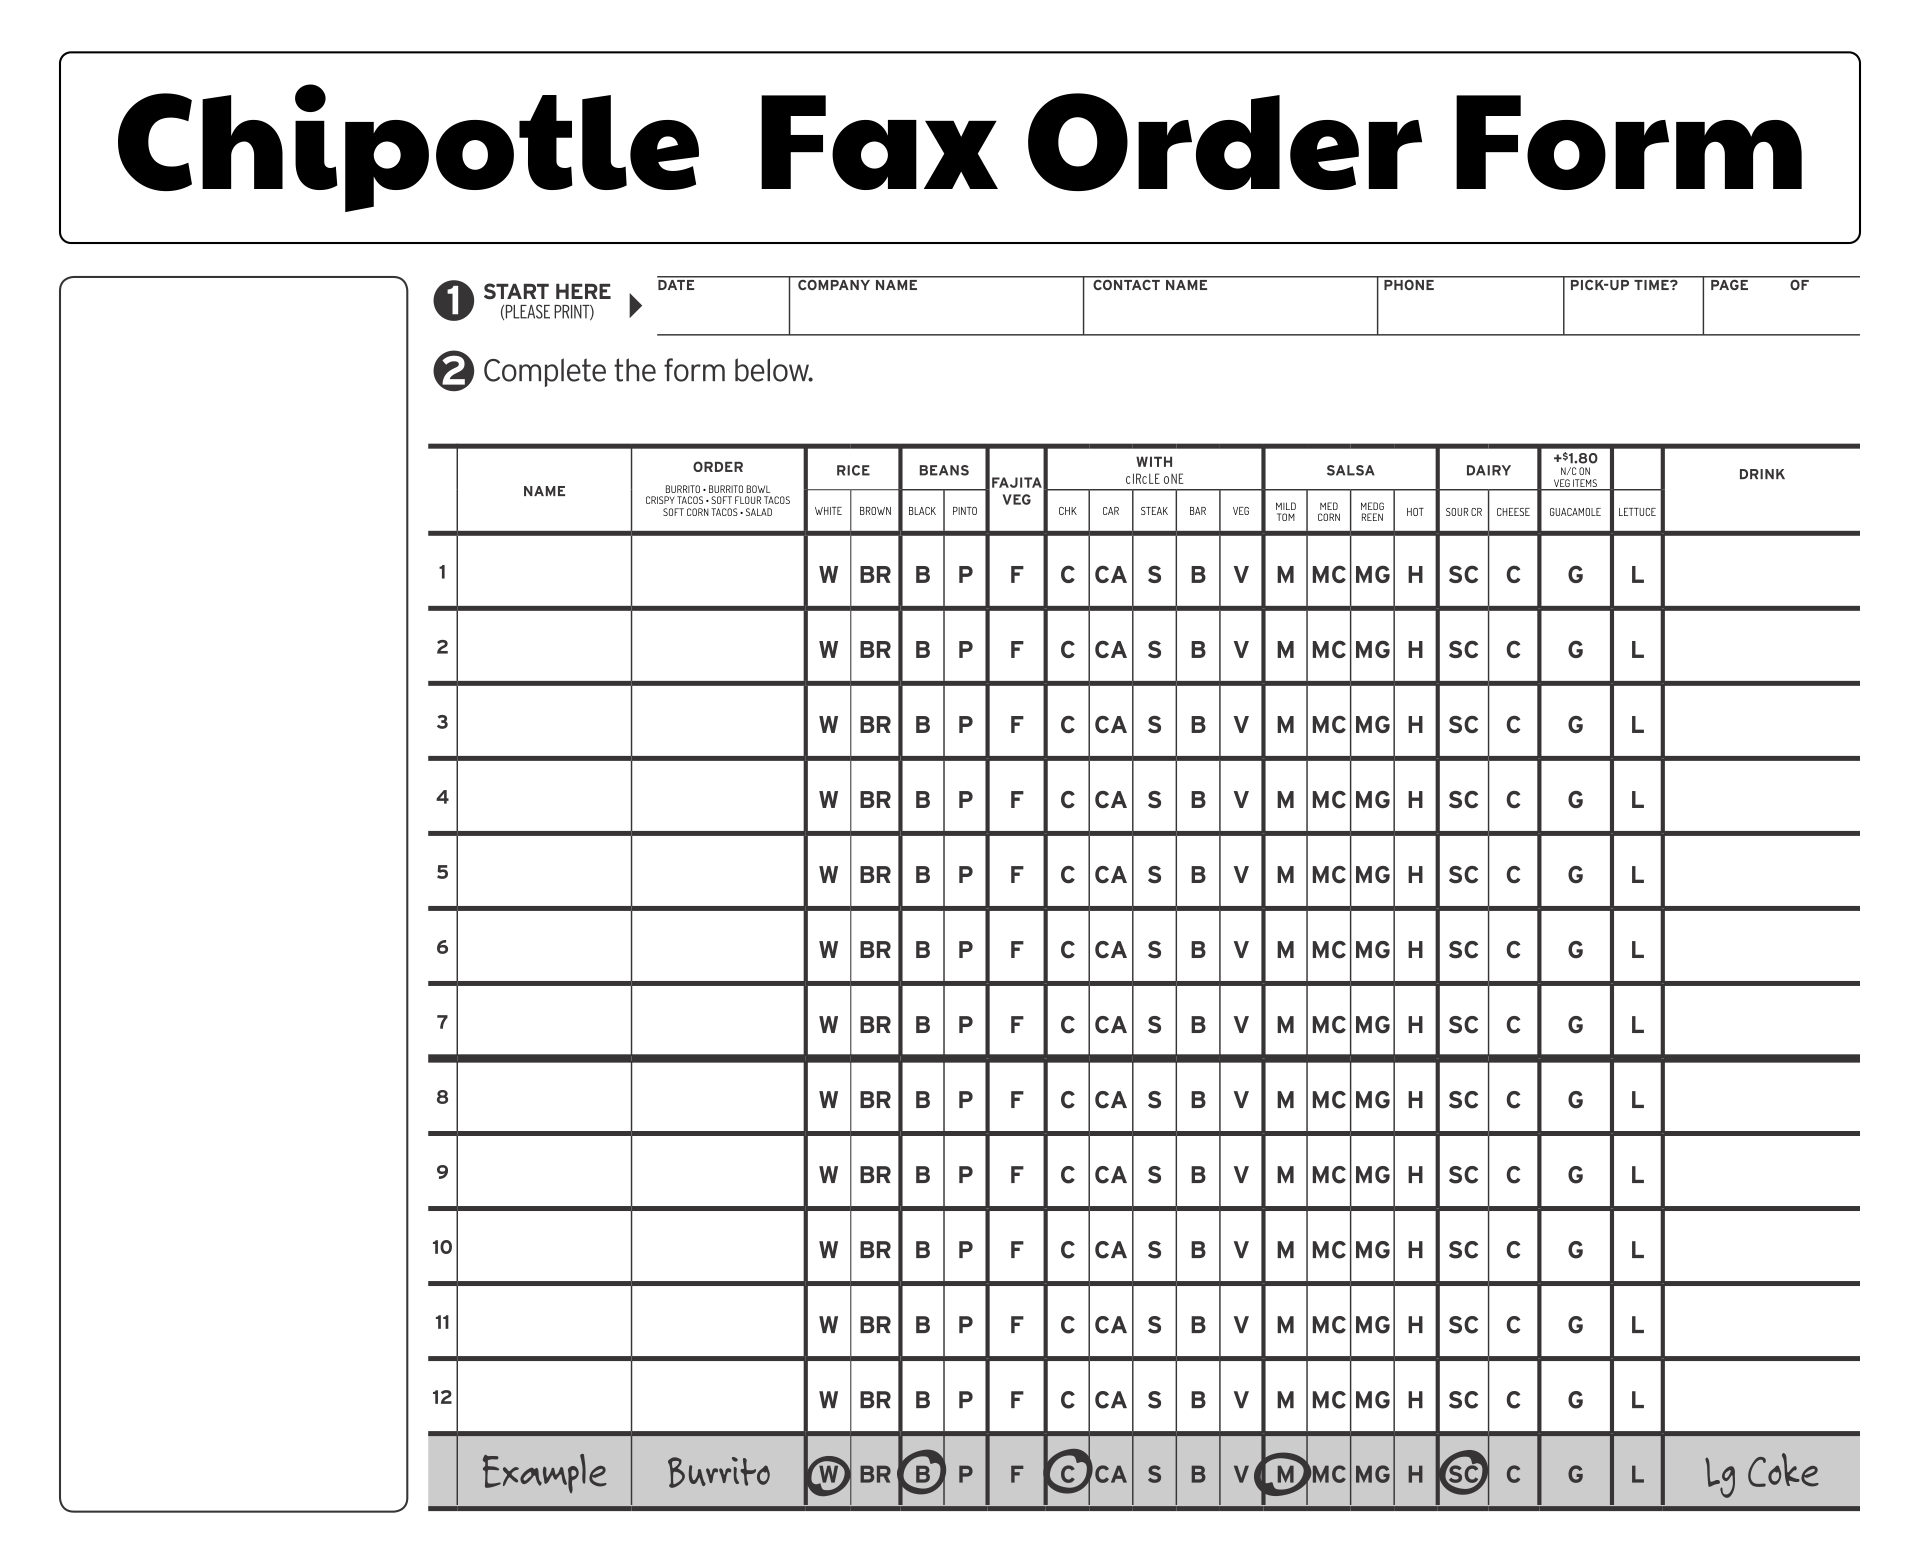 Chipotle Fax Order Form